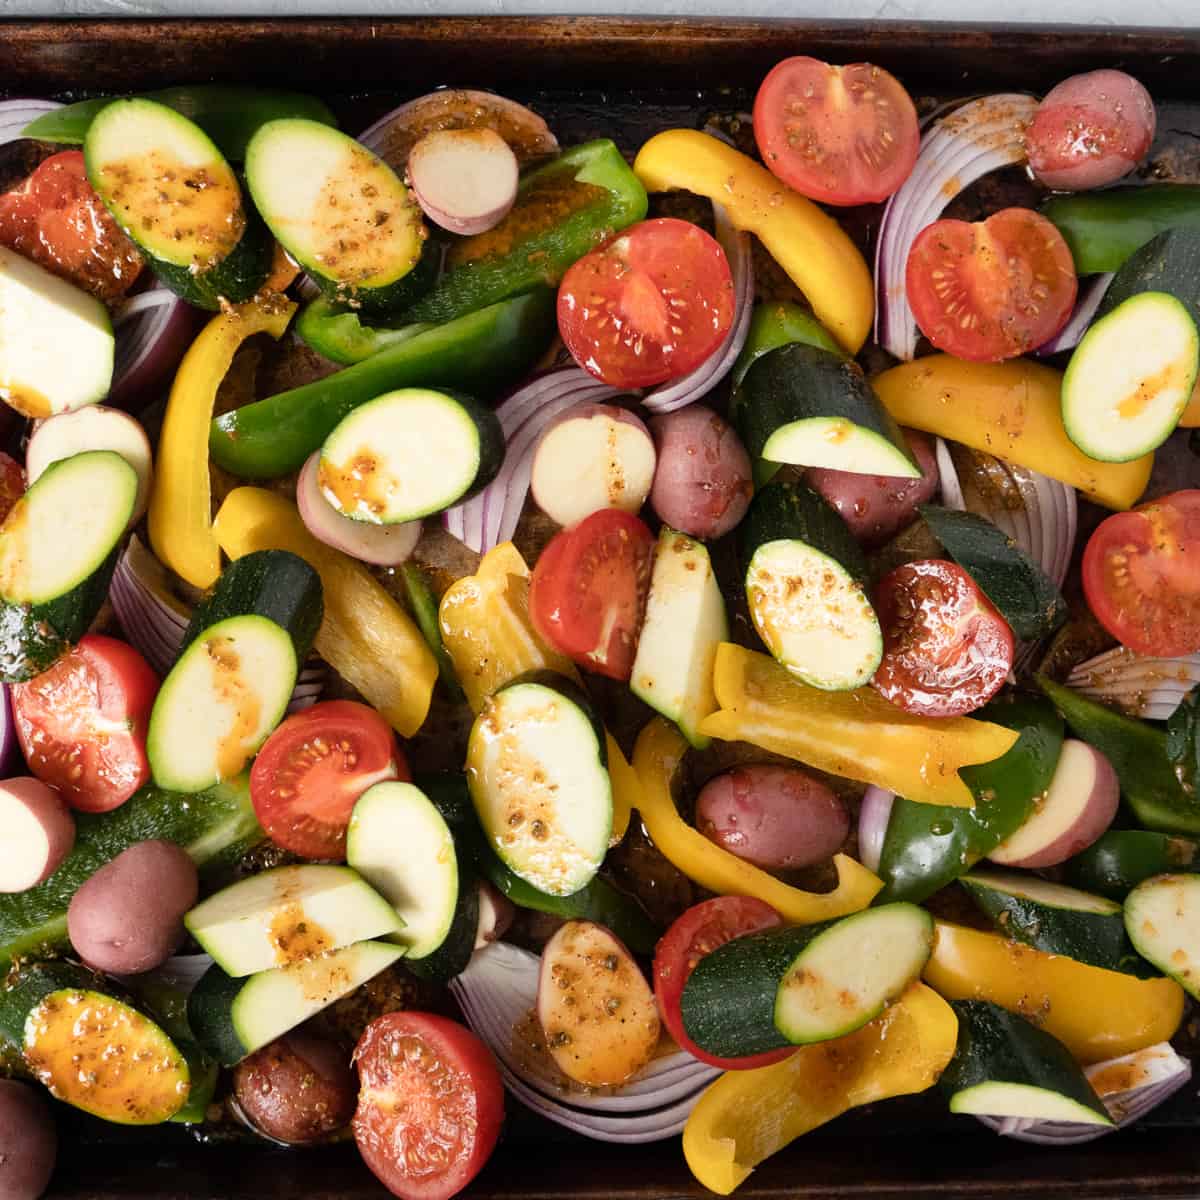 all the prepared vegetables on a baking tray, drizzled with remaining marinade.